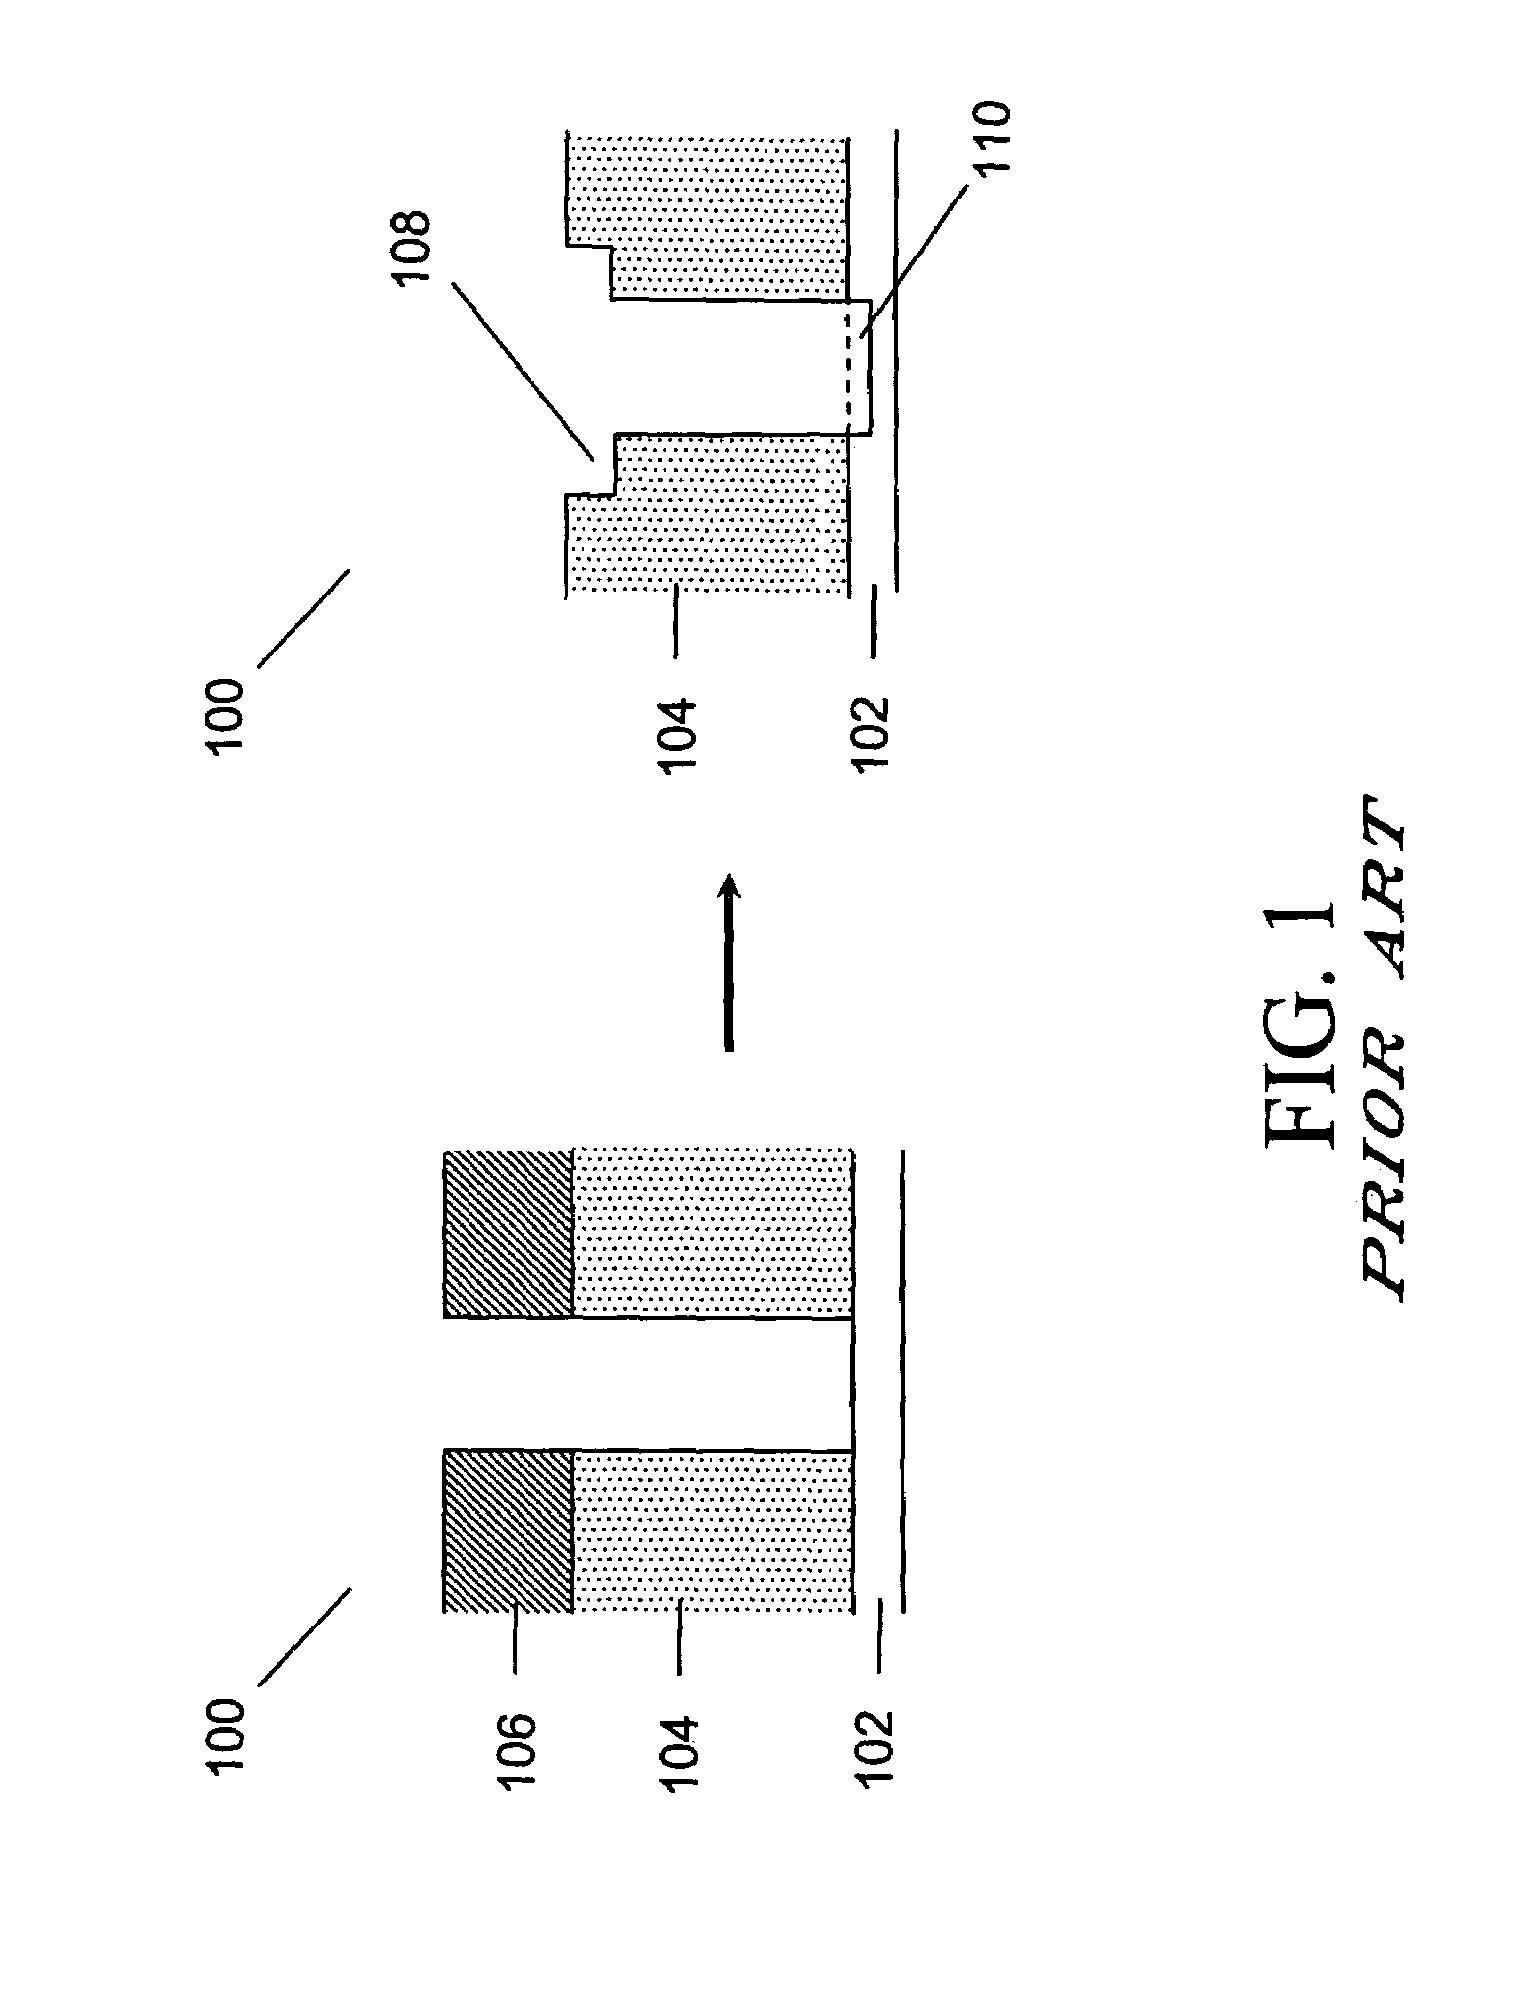 Method for removing photoresist and etch residues